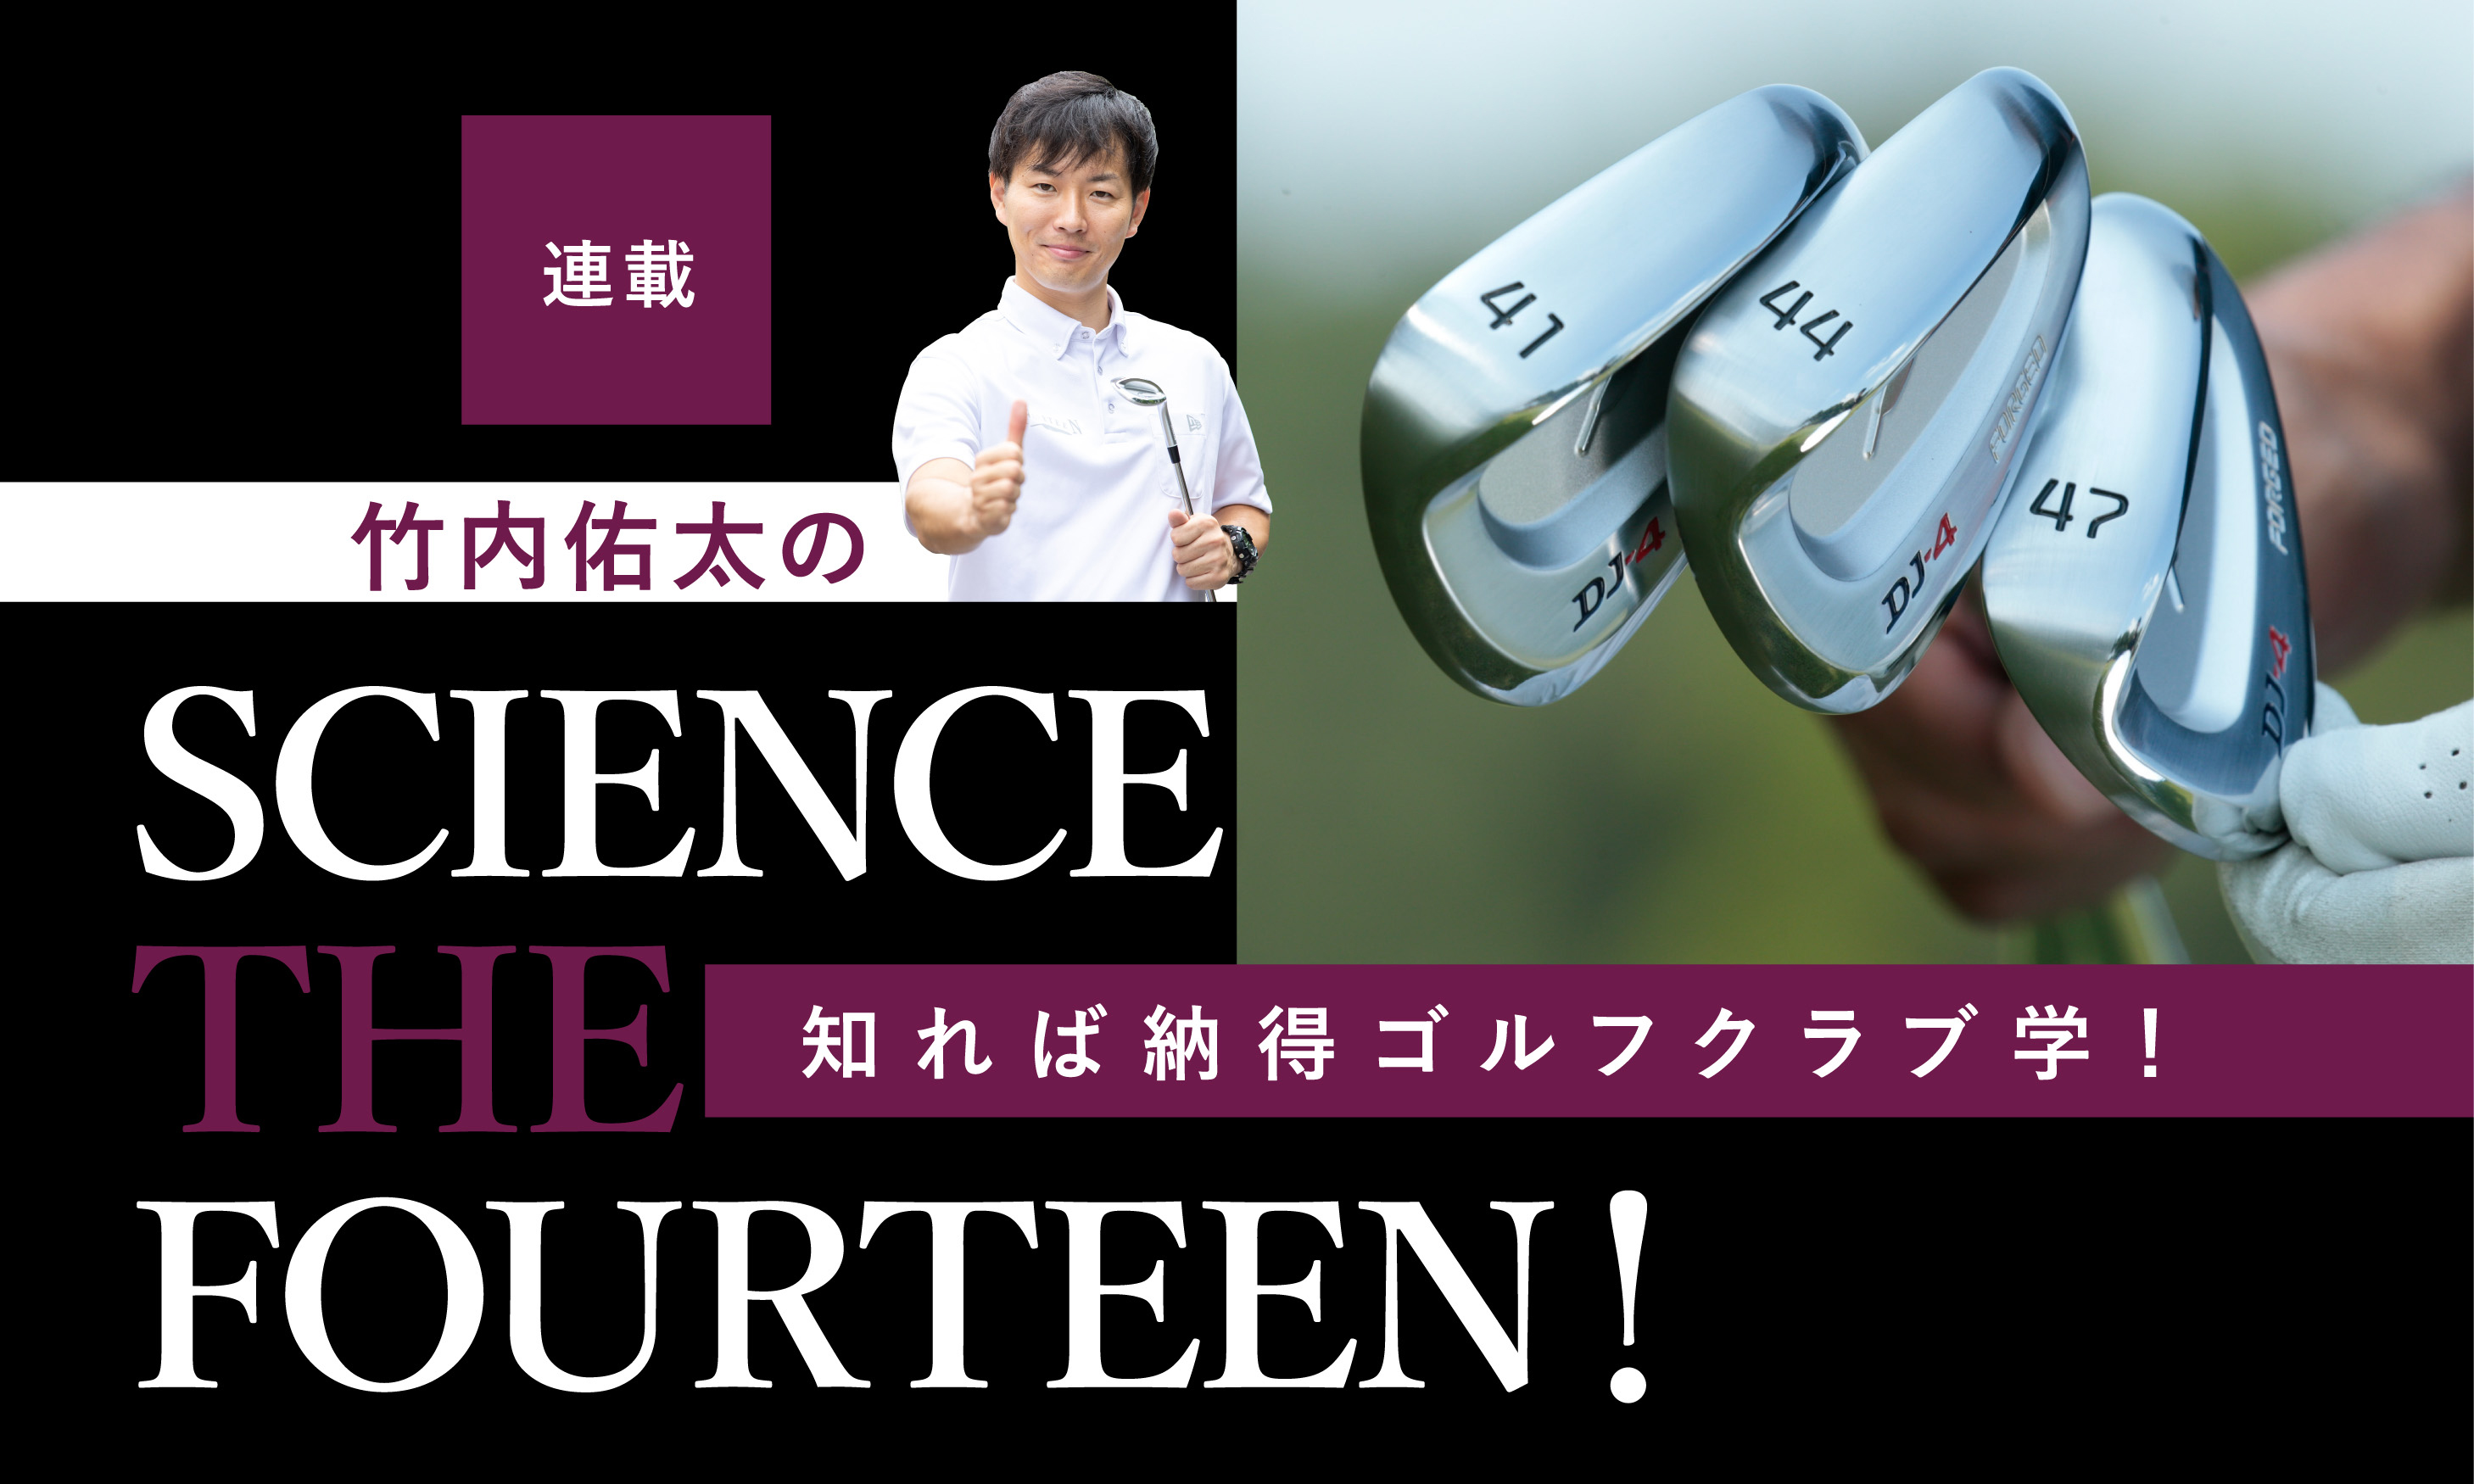 SCIENCE THE FOURTEEN！